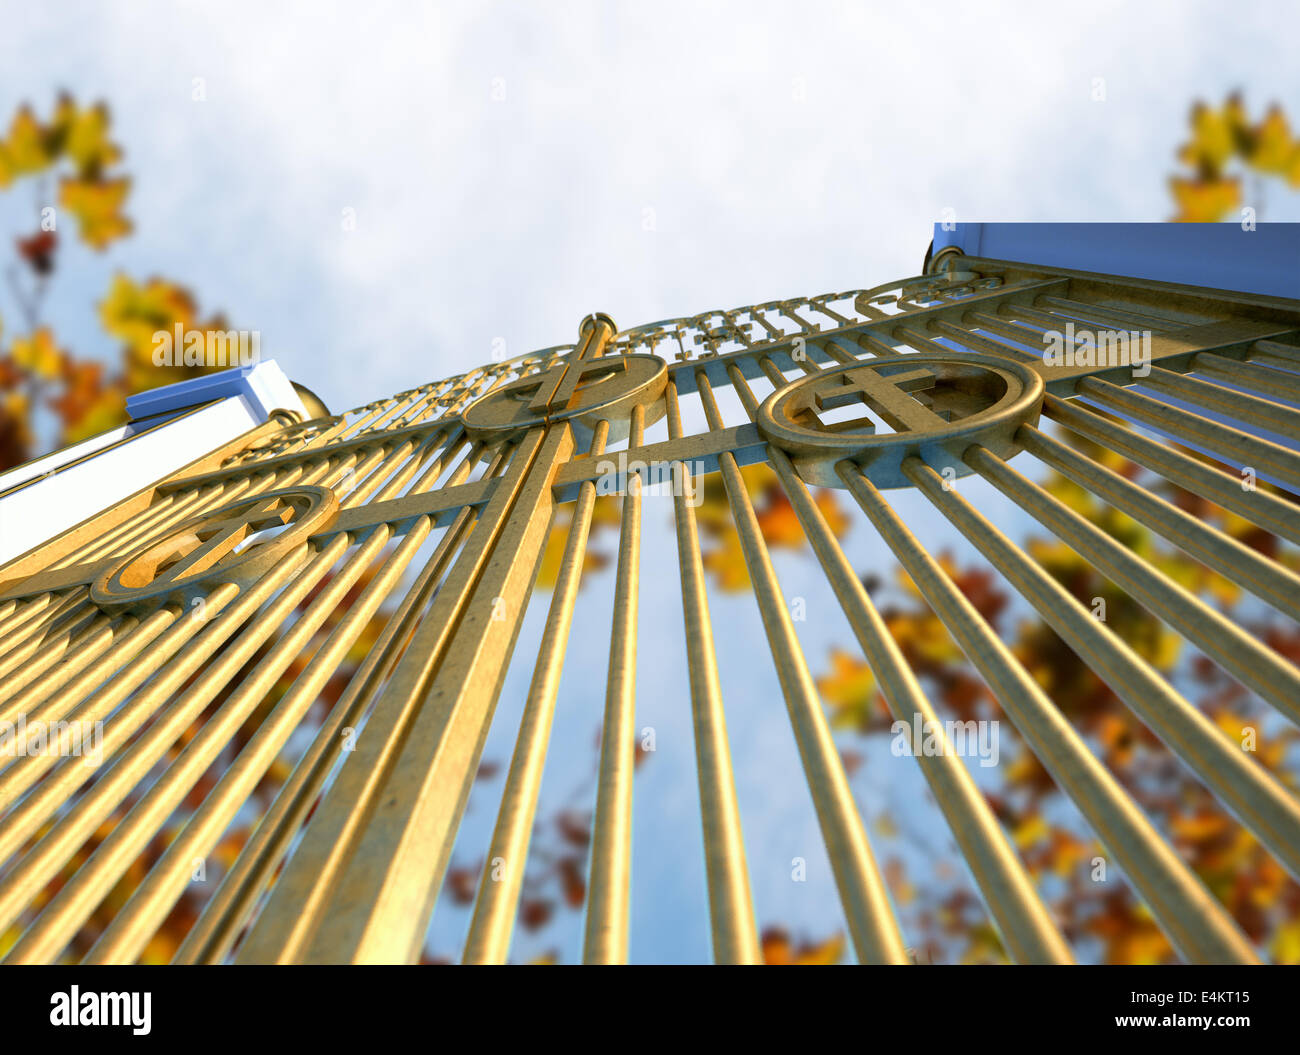 A concept image of the golden gates to heaven shut on an autumn leave and blue sky background Stock Photo